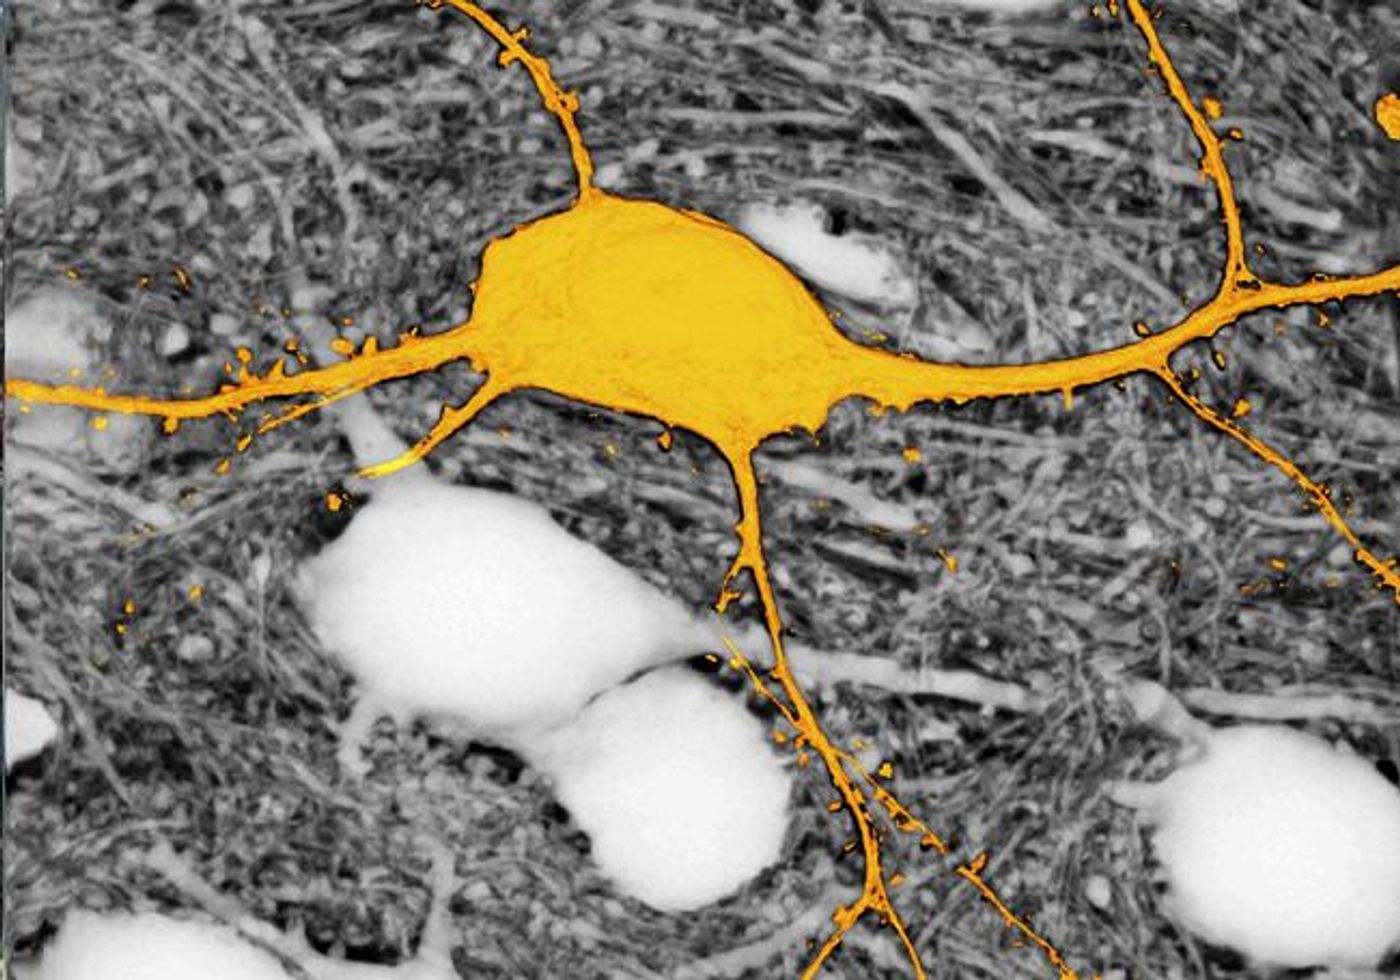 Image of the neuron labelled in yellow surrounded by unlabelled neurons (appearing in white) using the SUSHI technique. Without this technique, the neurons appearing in white would not be visible. / Credit: © Jan Tønnesen & Valentin Nägerl.